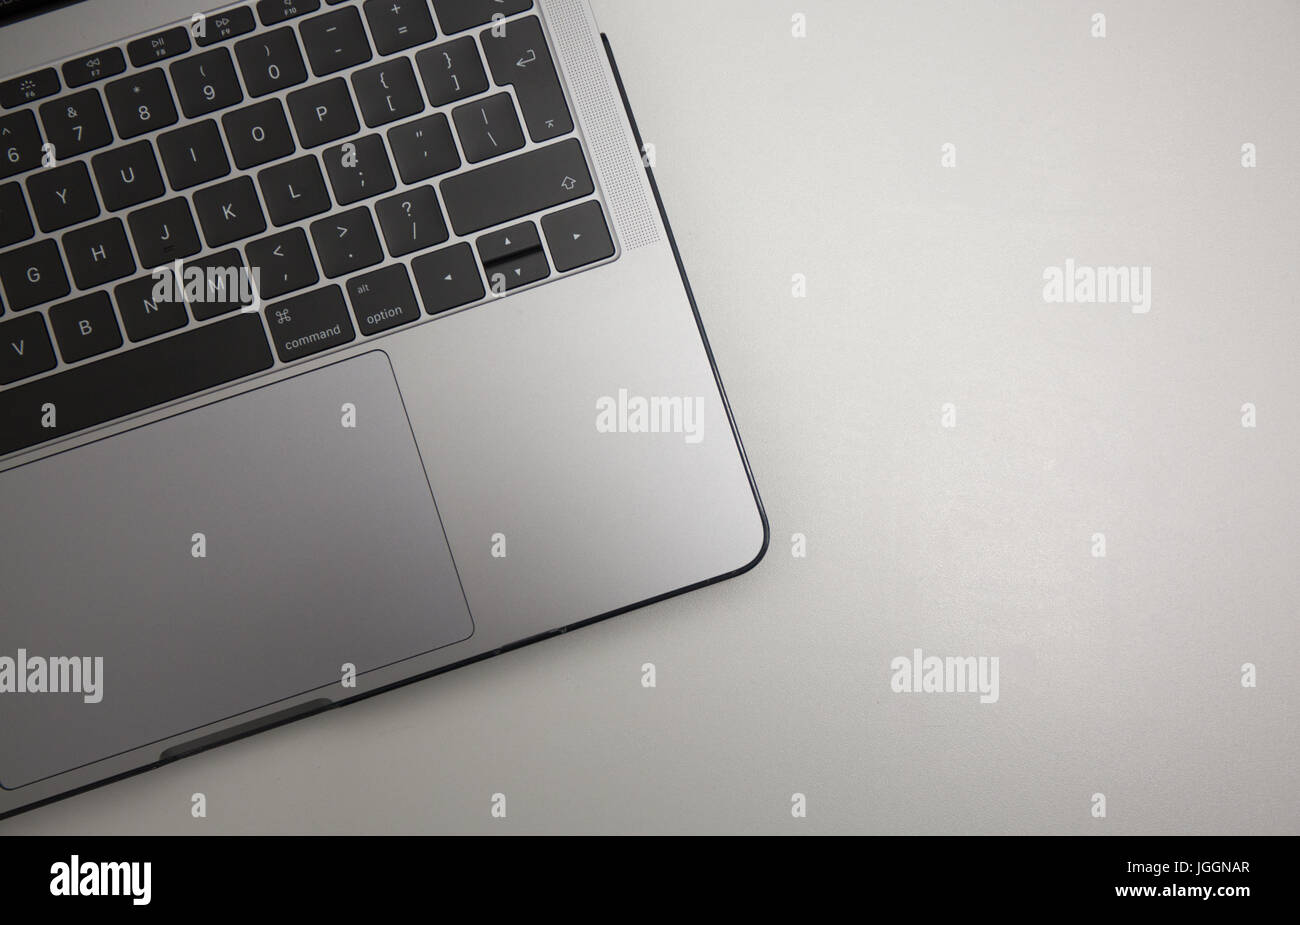 Laptop on flat grey background with room for copy or text. Stock Photo